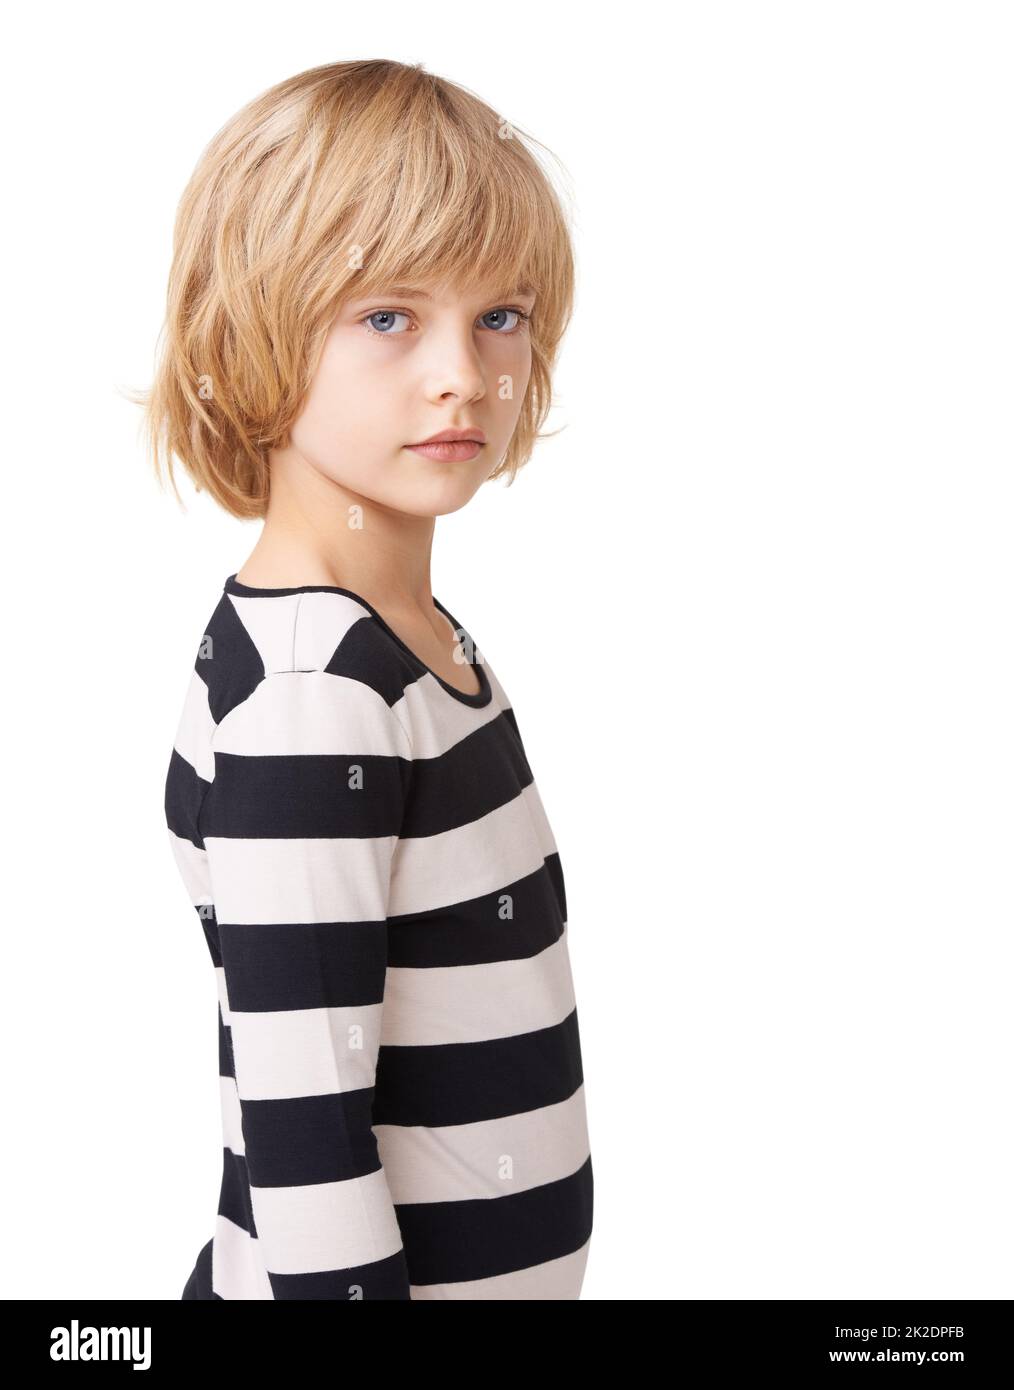 Striped sweetheart. Portrait of a pretty little girl standing profile against a white background. Stock Photo